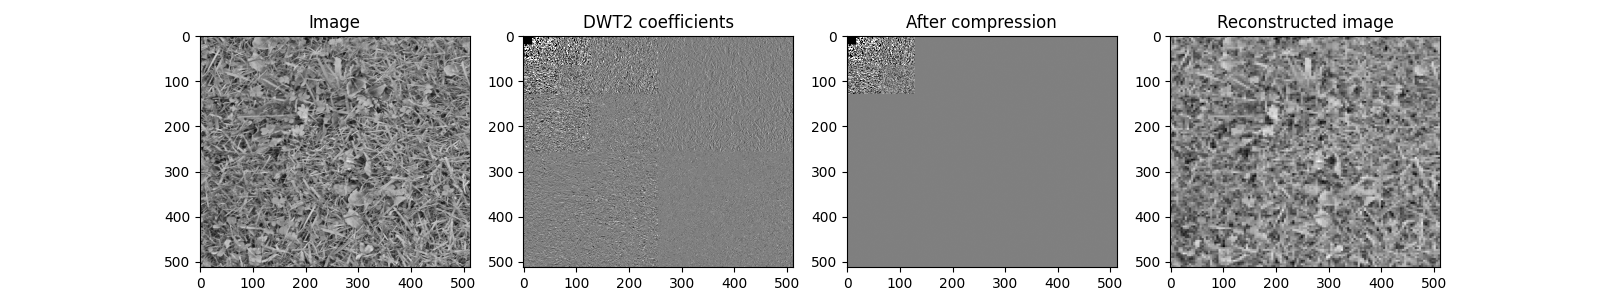 Image, DWT2 coefficients, After compression, Reconstructed image